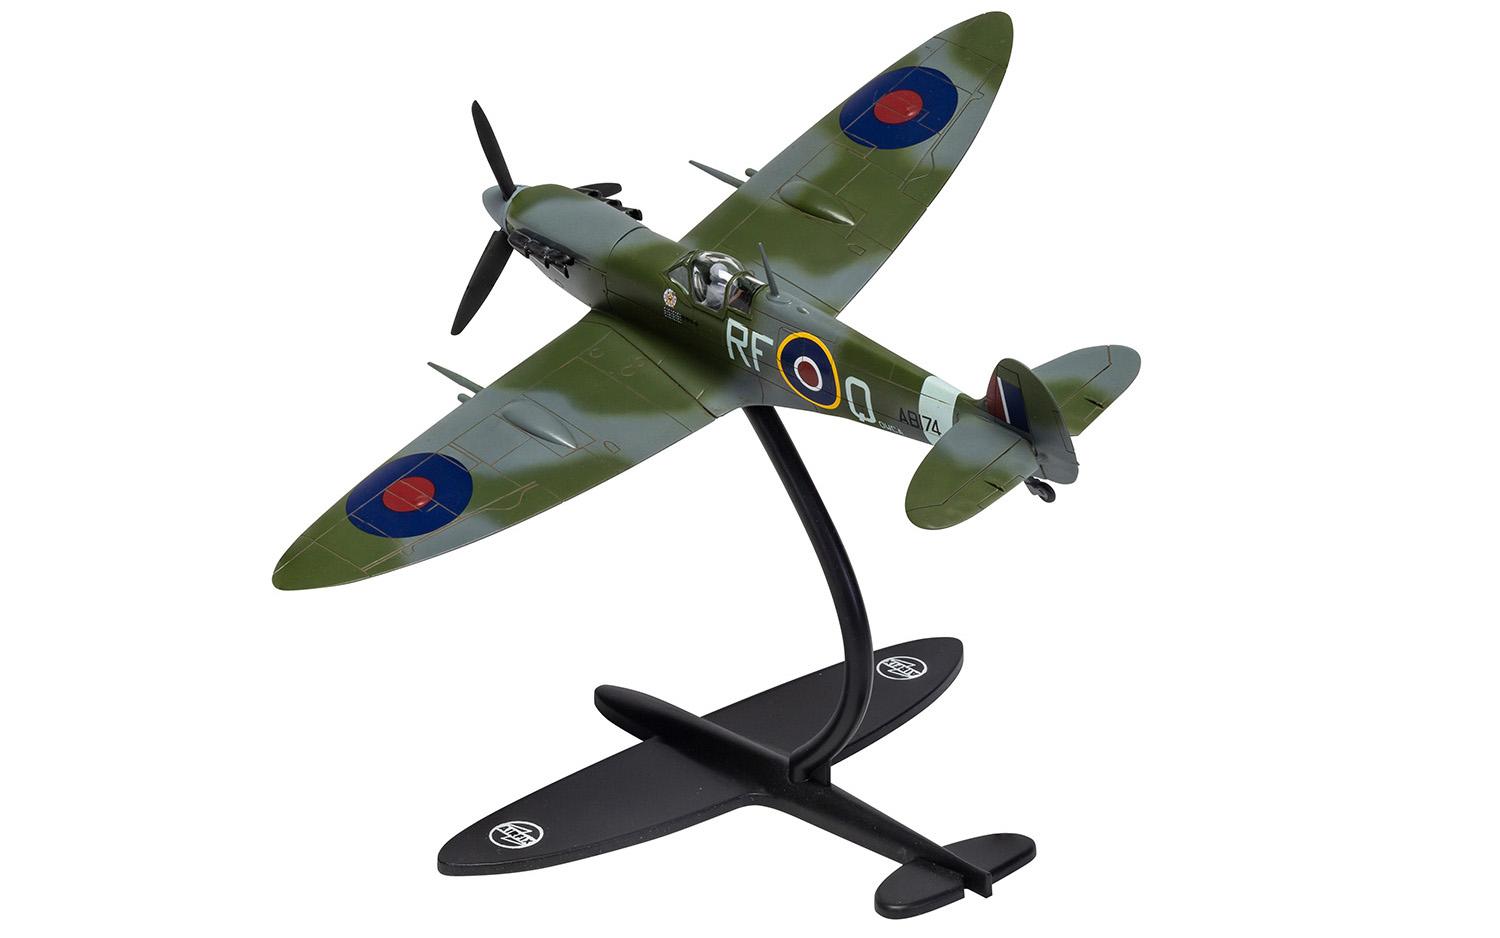 Rear view of the Spitfire model airplane.